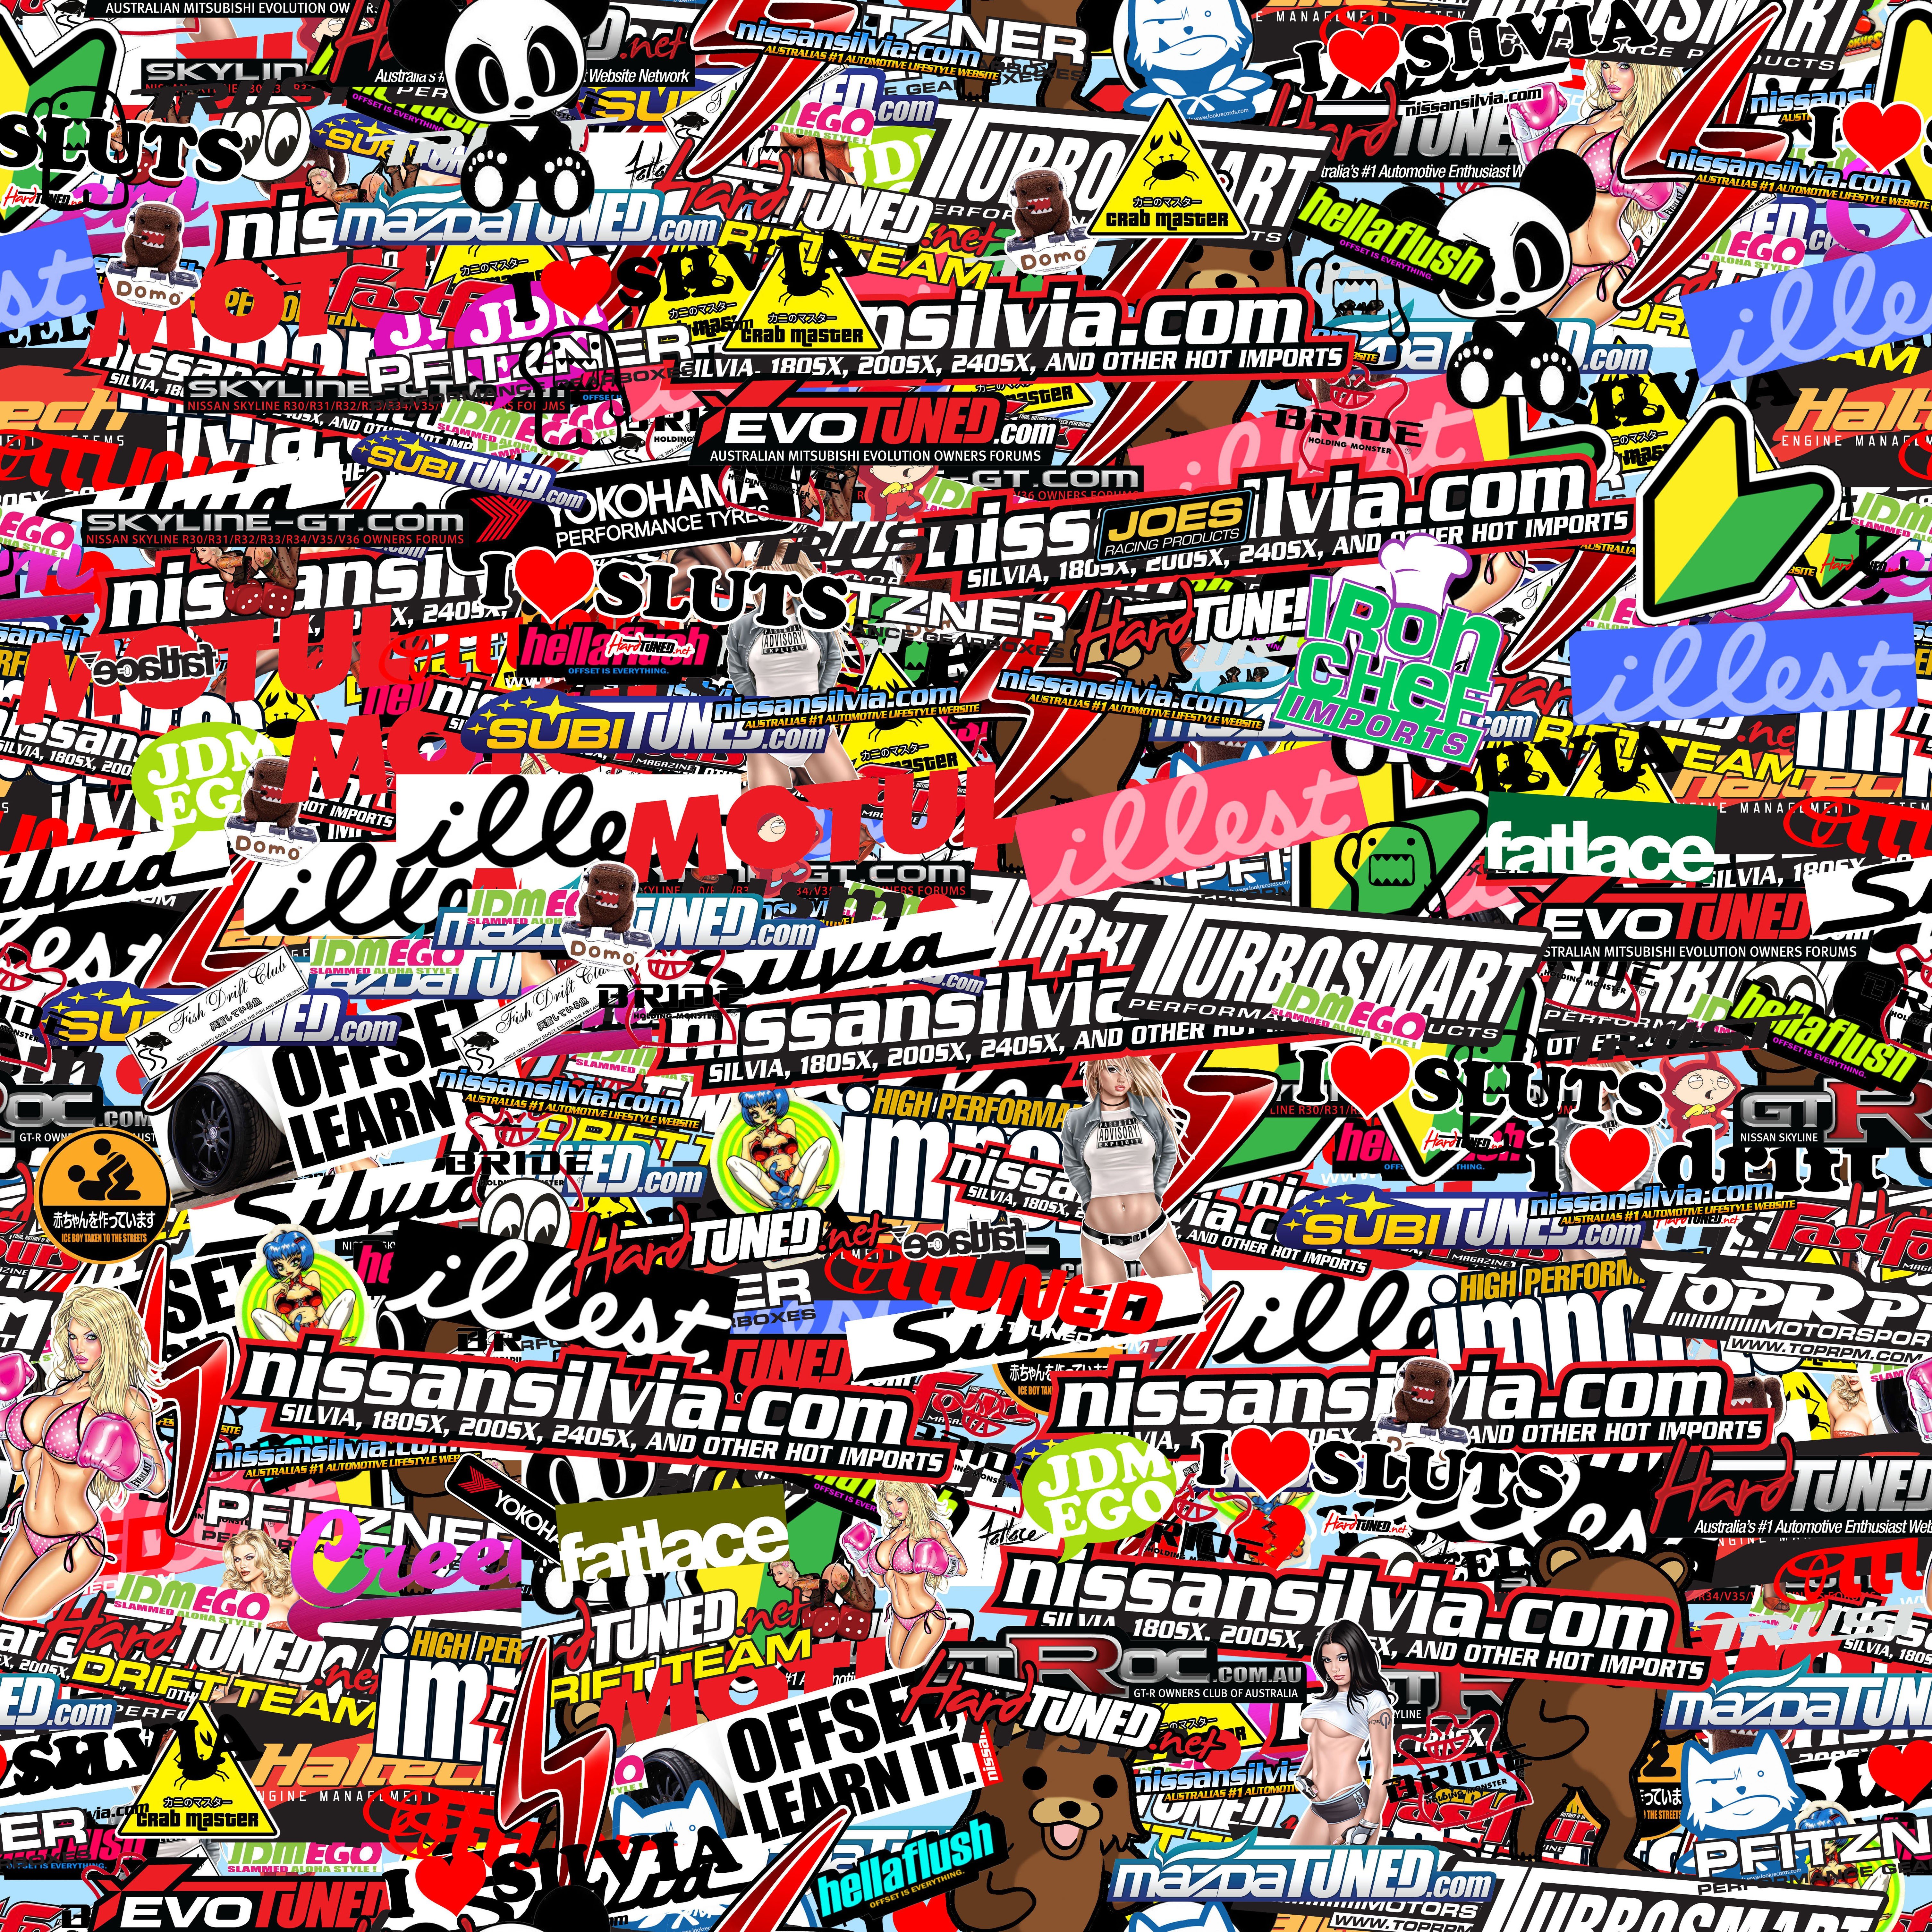 Sticker Bomb, Sticks, Bomb HD Wallpapers / Desktop and Mobile Images